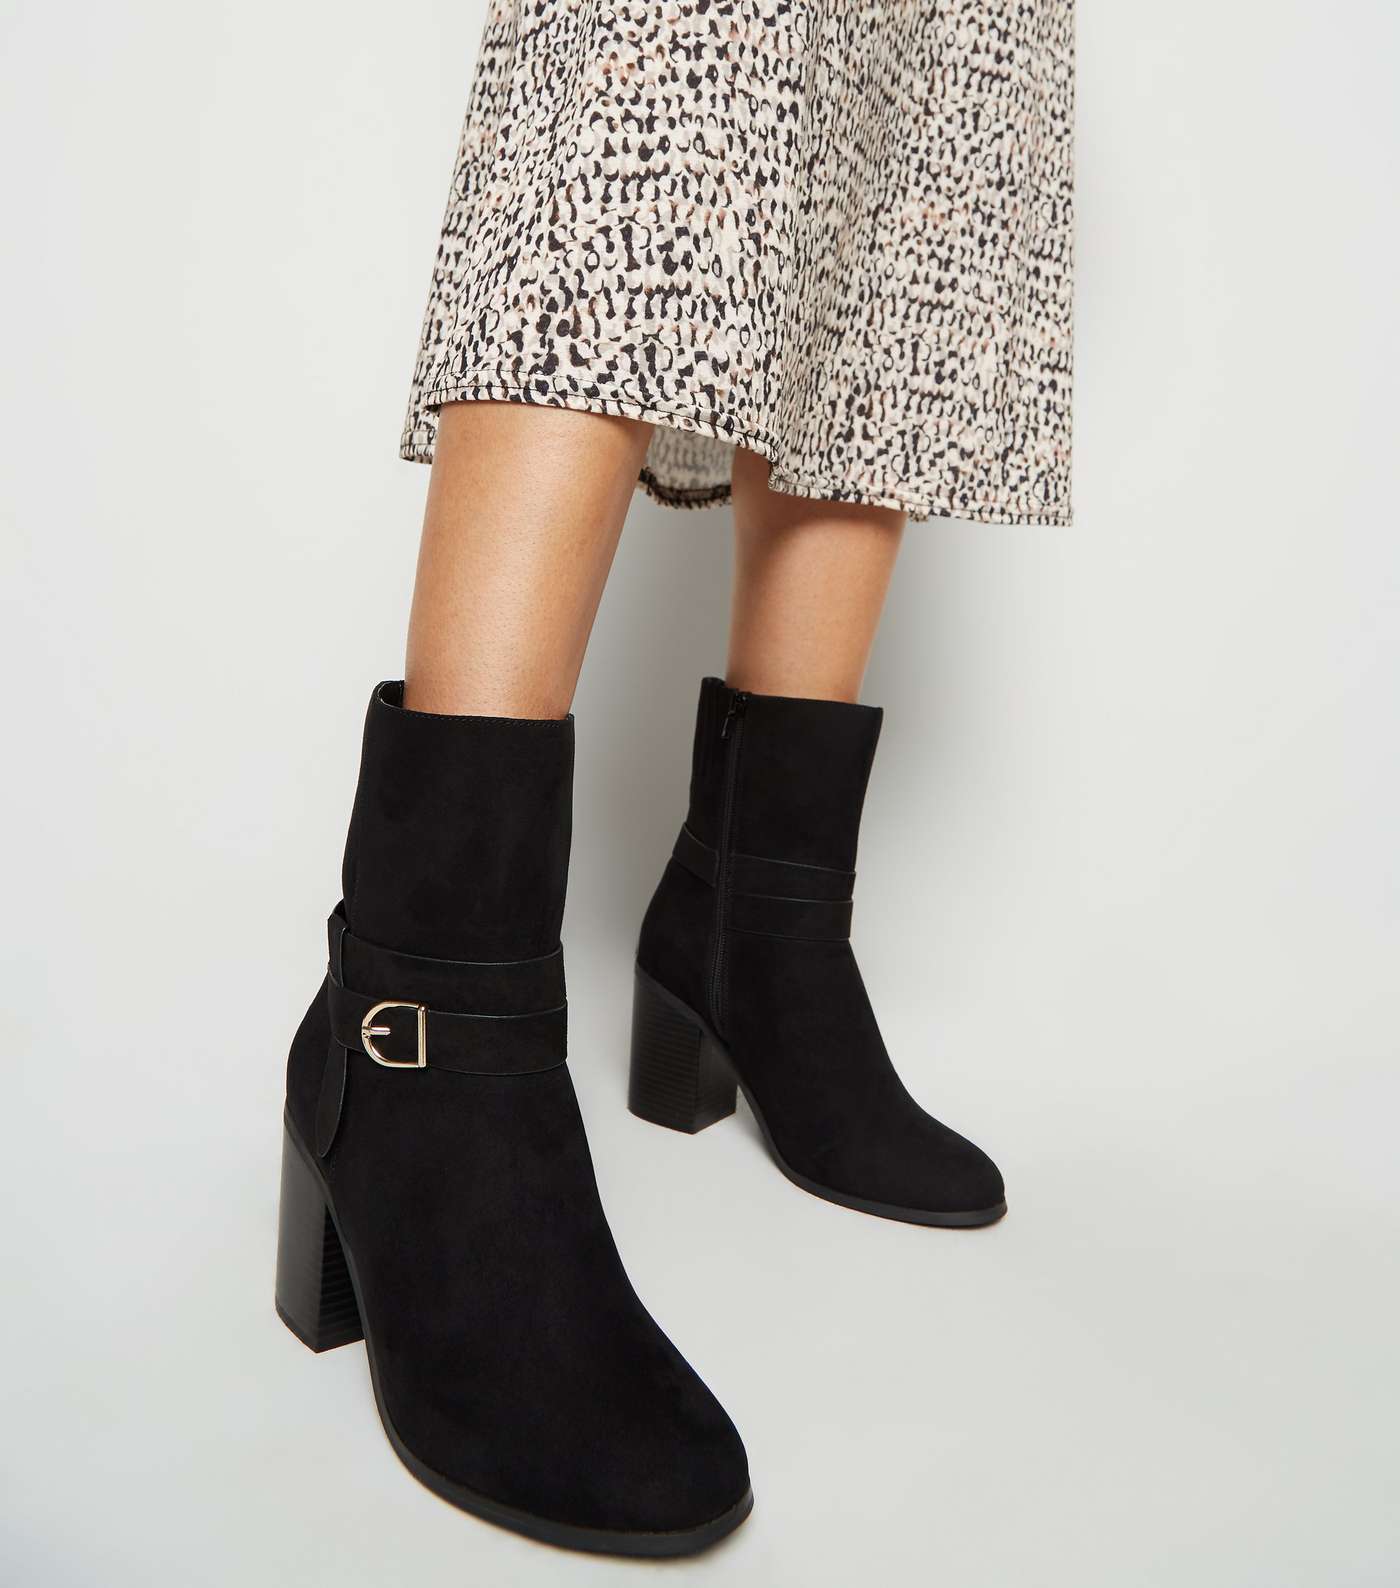 Wide Fit Black Suedette Heeled Calf Boots Image 2